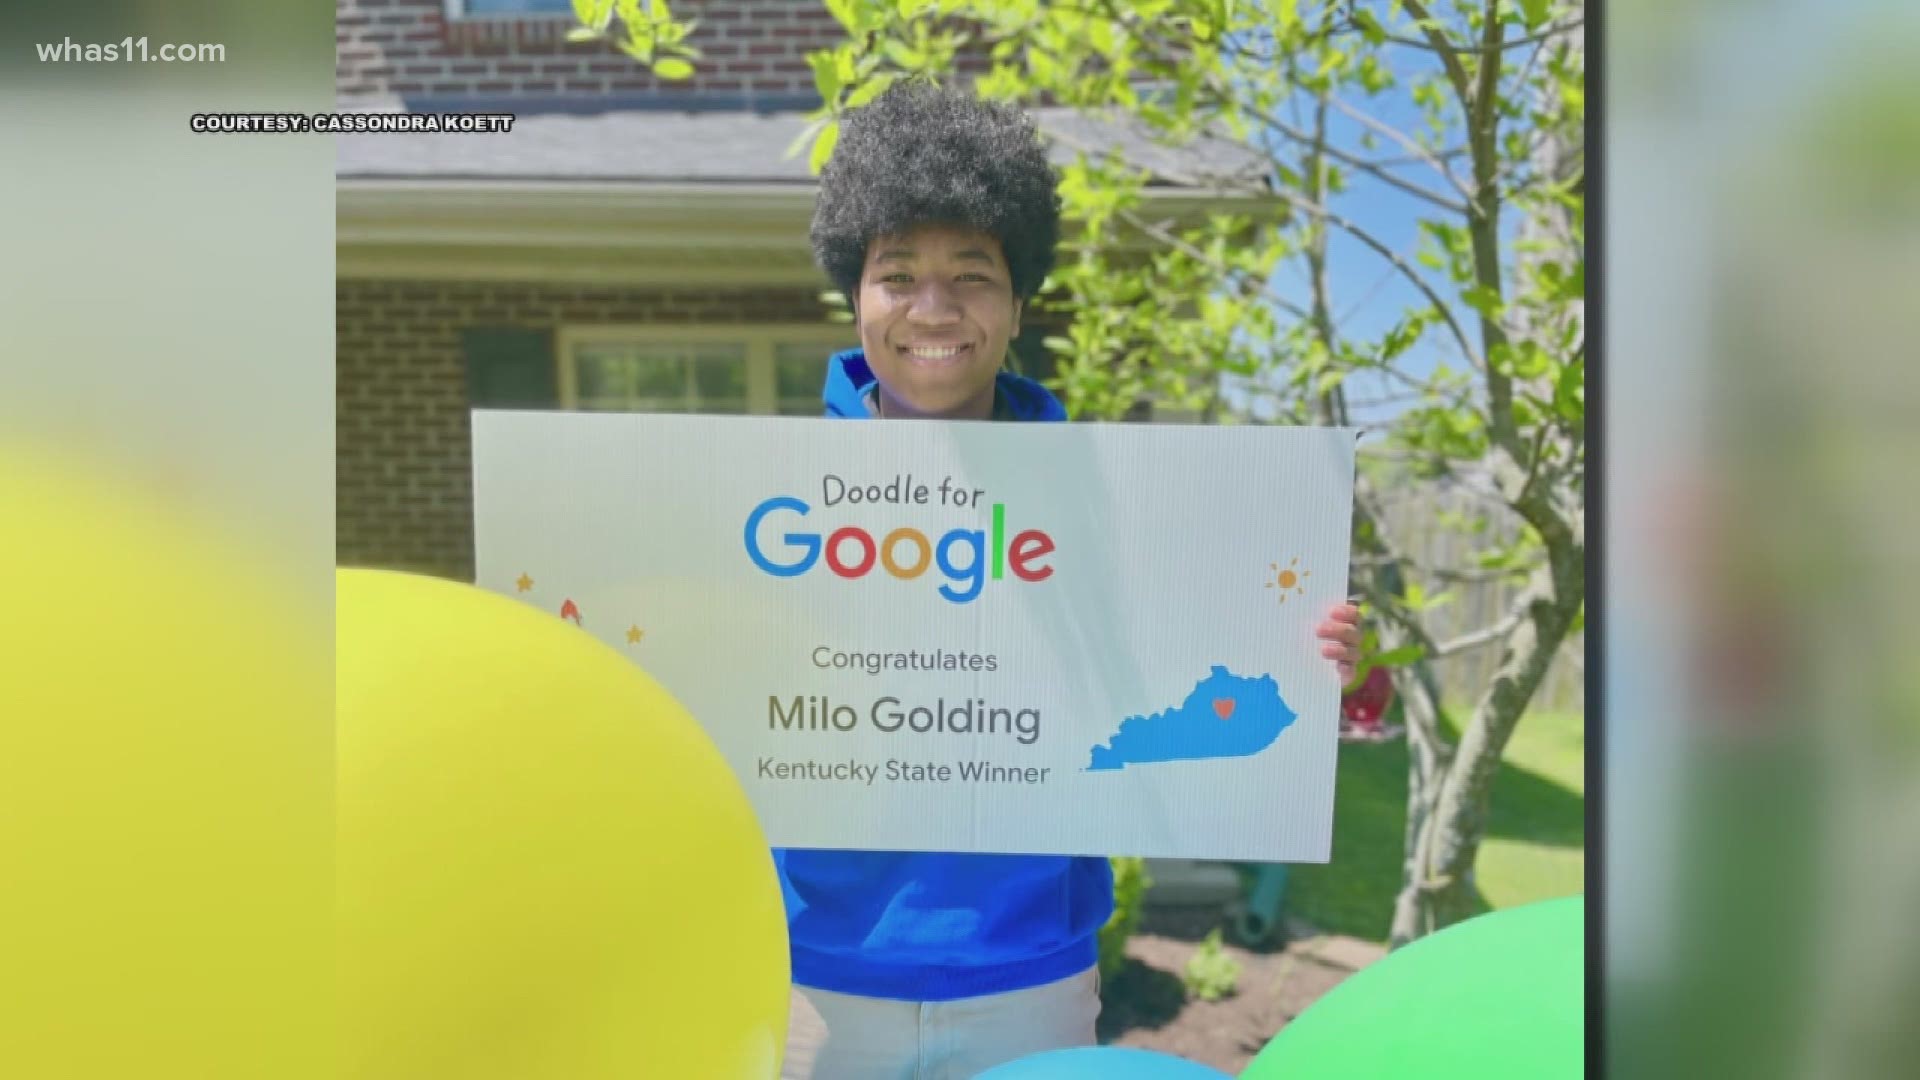 Milo Golding, a student at Lexington Christian Academy, won Google's Doodle for Google competition for 2021.